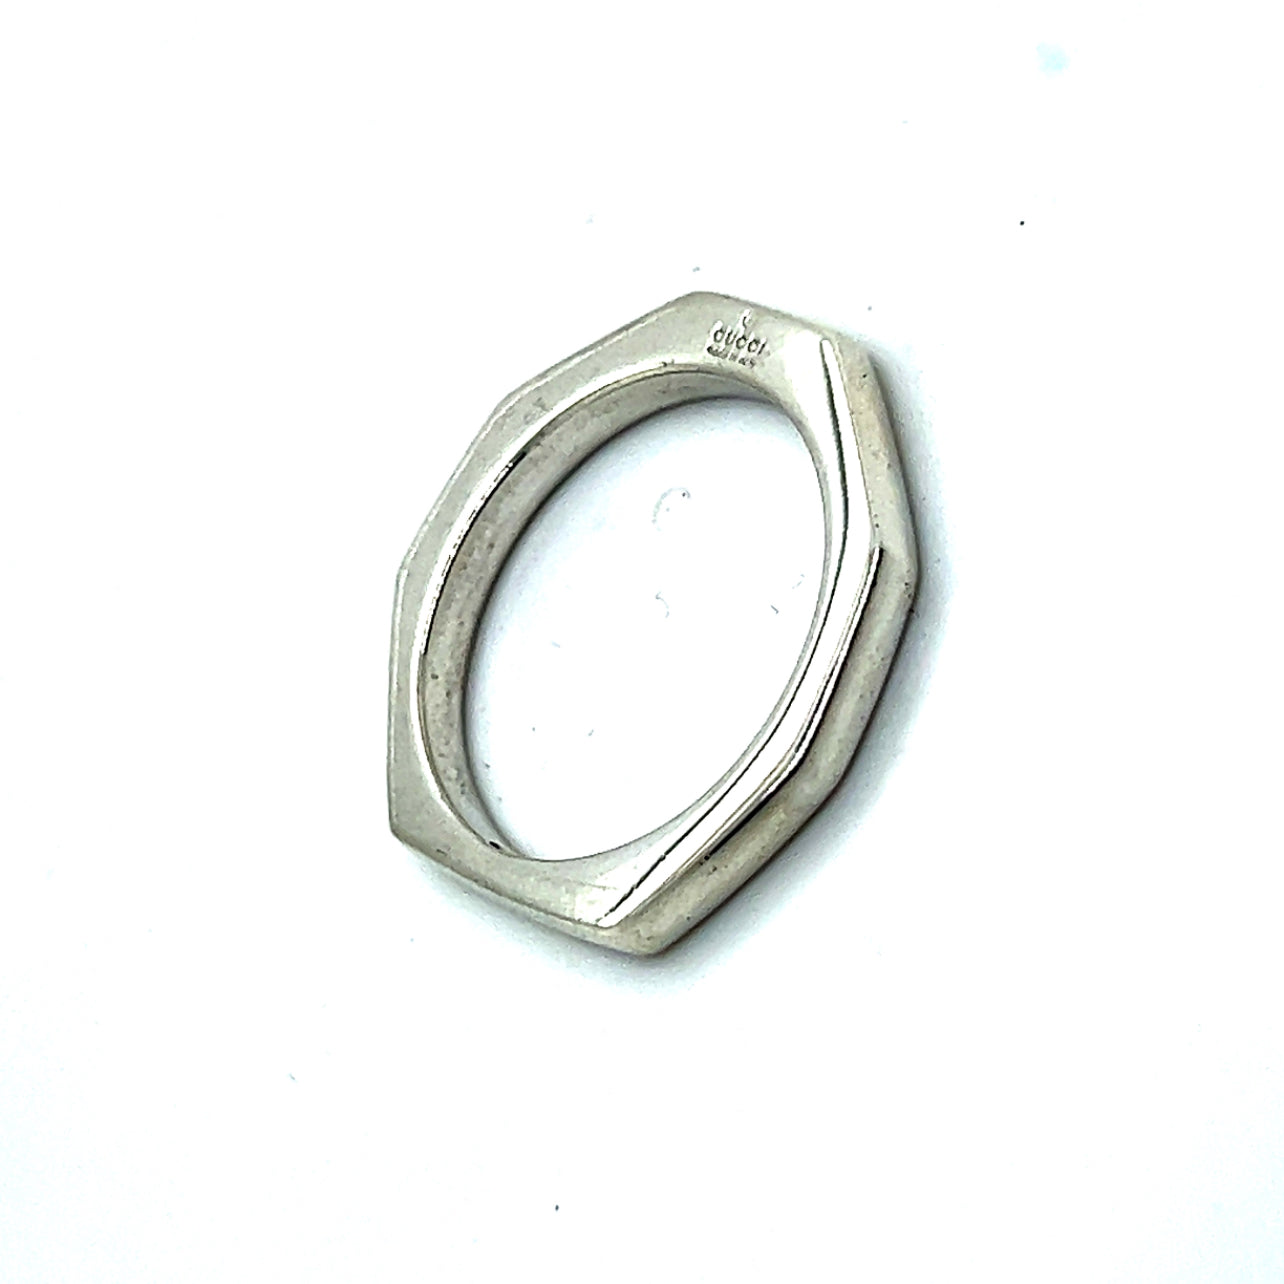 Gucci Authentic Estate Abstract Ring Size 10.5 Sterling Silver G6